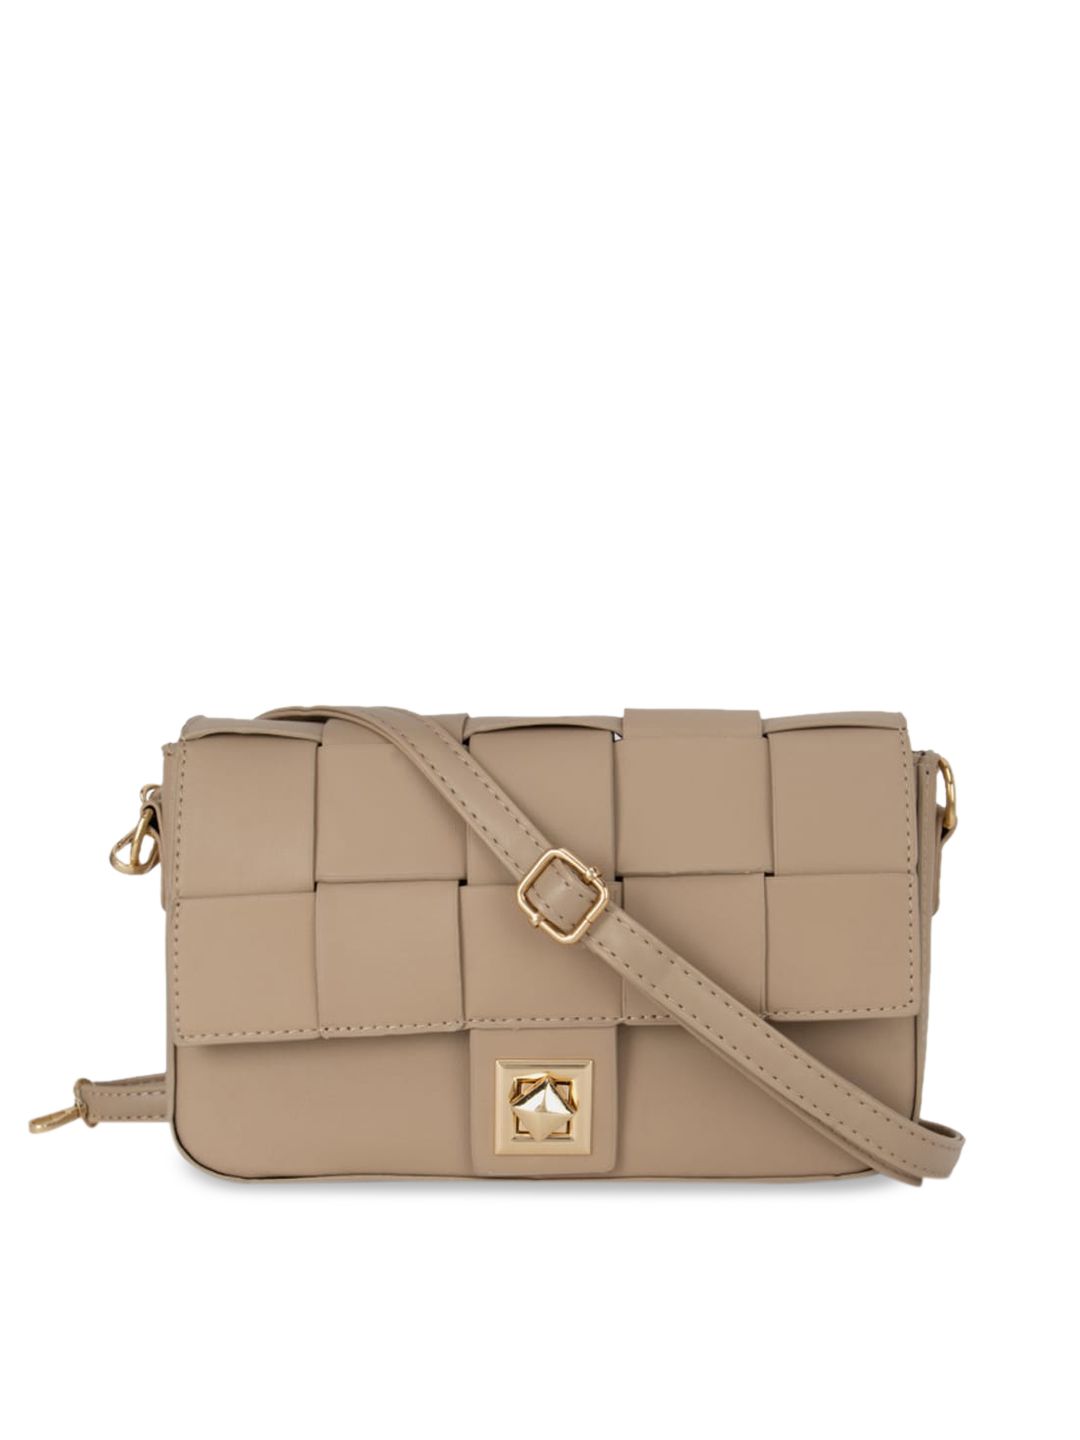 Kazo Beige Textured PU Structured Sling Bag Price in India